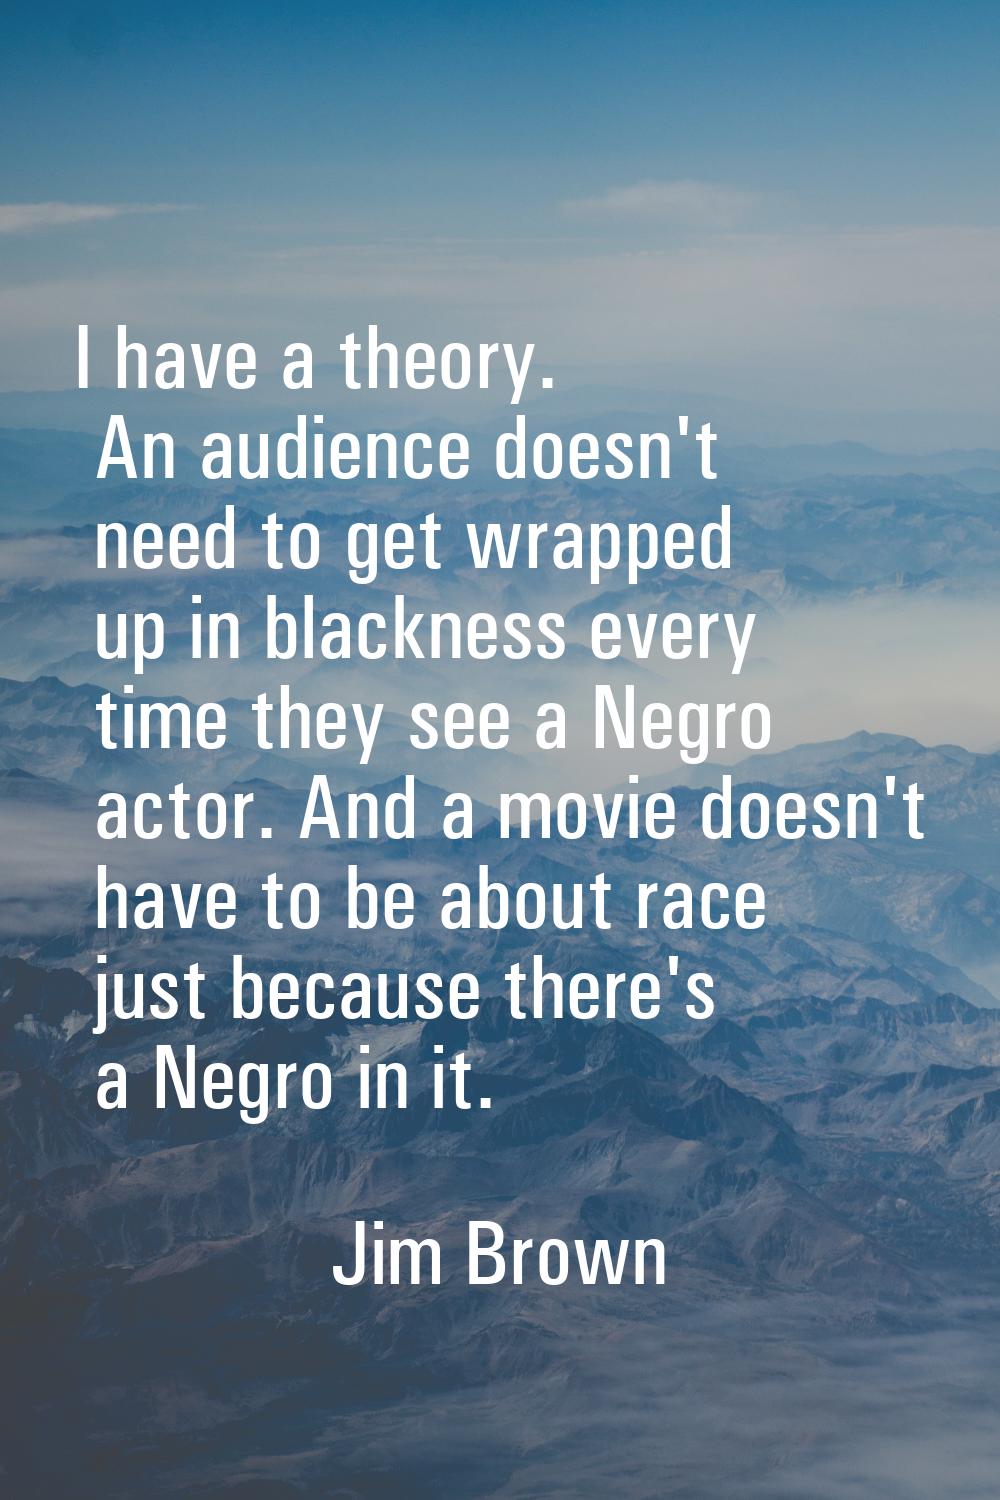 I have a theory. An audience doesn't need to get wrapped up in blackness every time they see a Negr